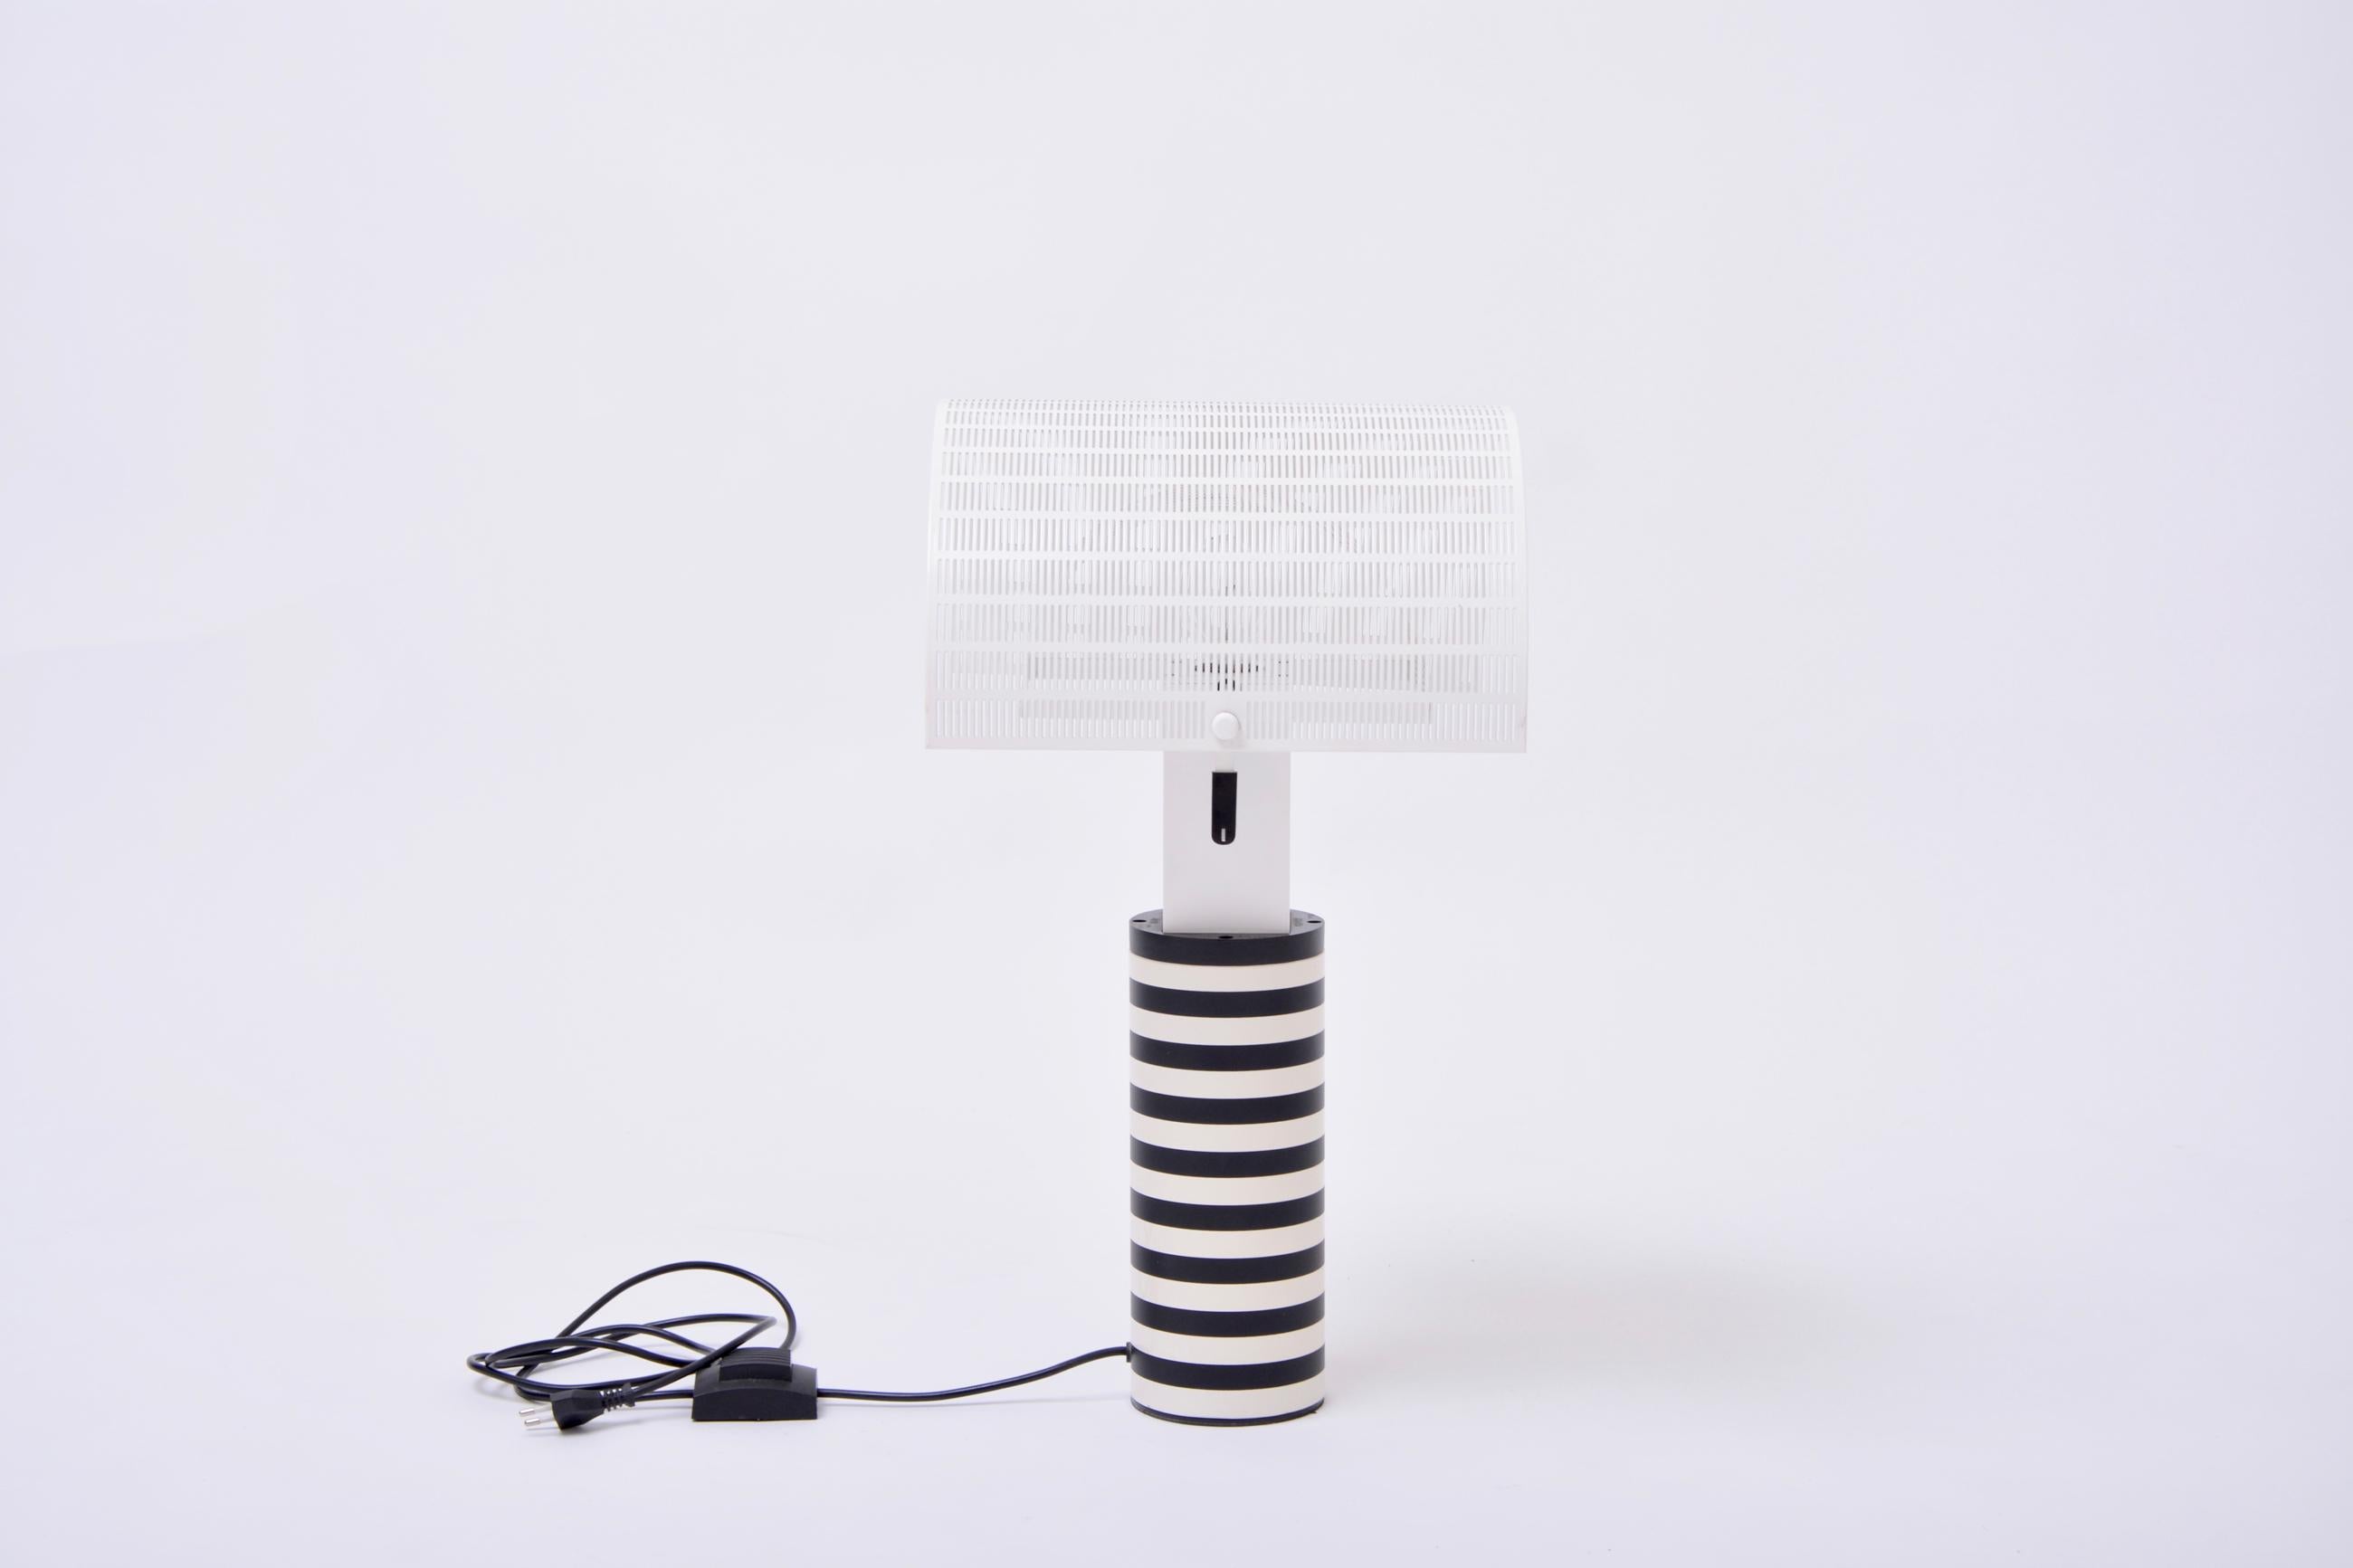 Postmodern Italian black and white table lamp 'Shogun' by Mario Botta for Artemide, 1986

A post modern table lamp by Mario Botta for Artemide. The cylindrical base made of powder coated cast iron features a bold black and white striped pattern. Two